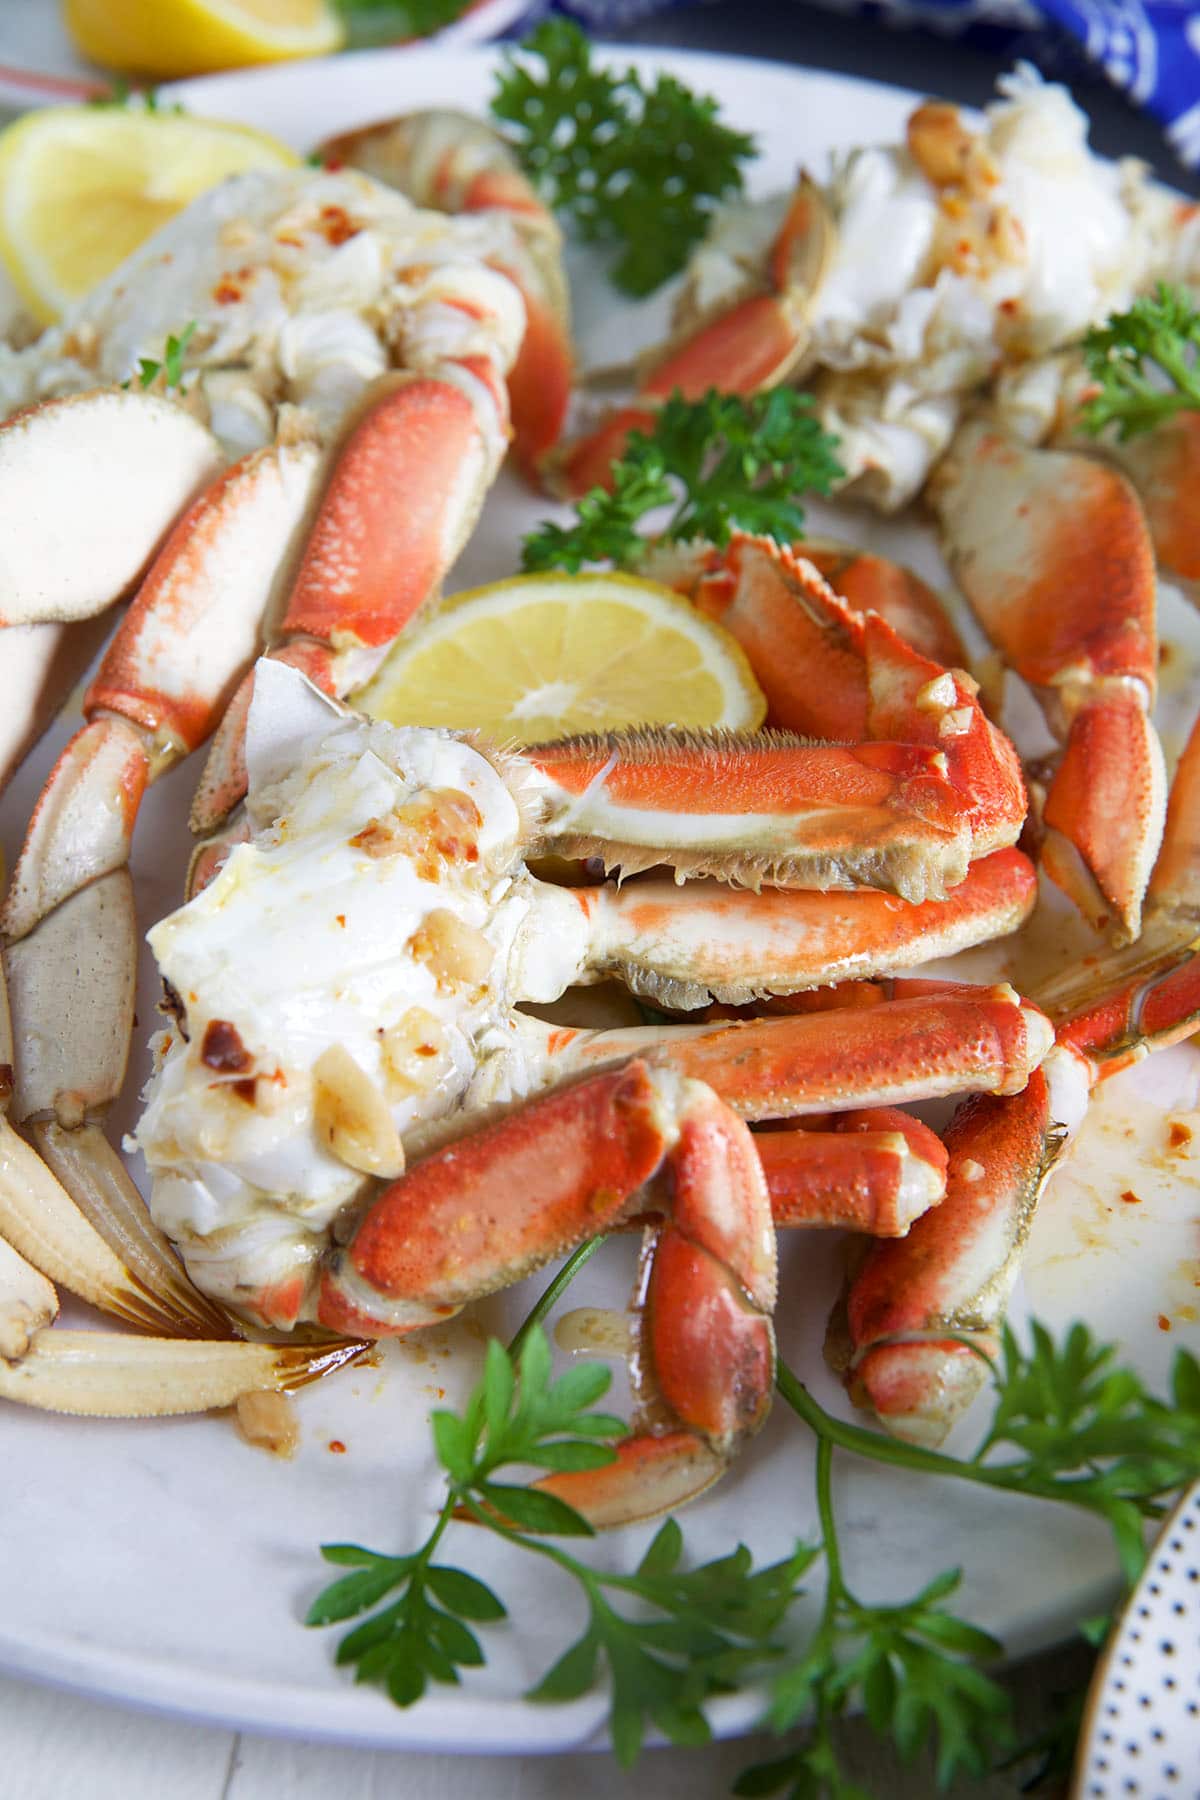 Crab legs are arranged on a plate next to a lemon slice.